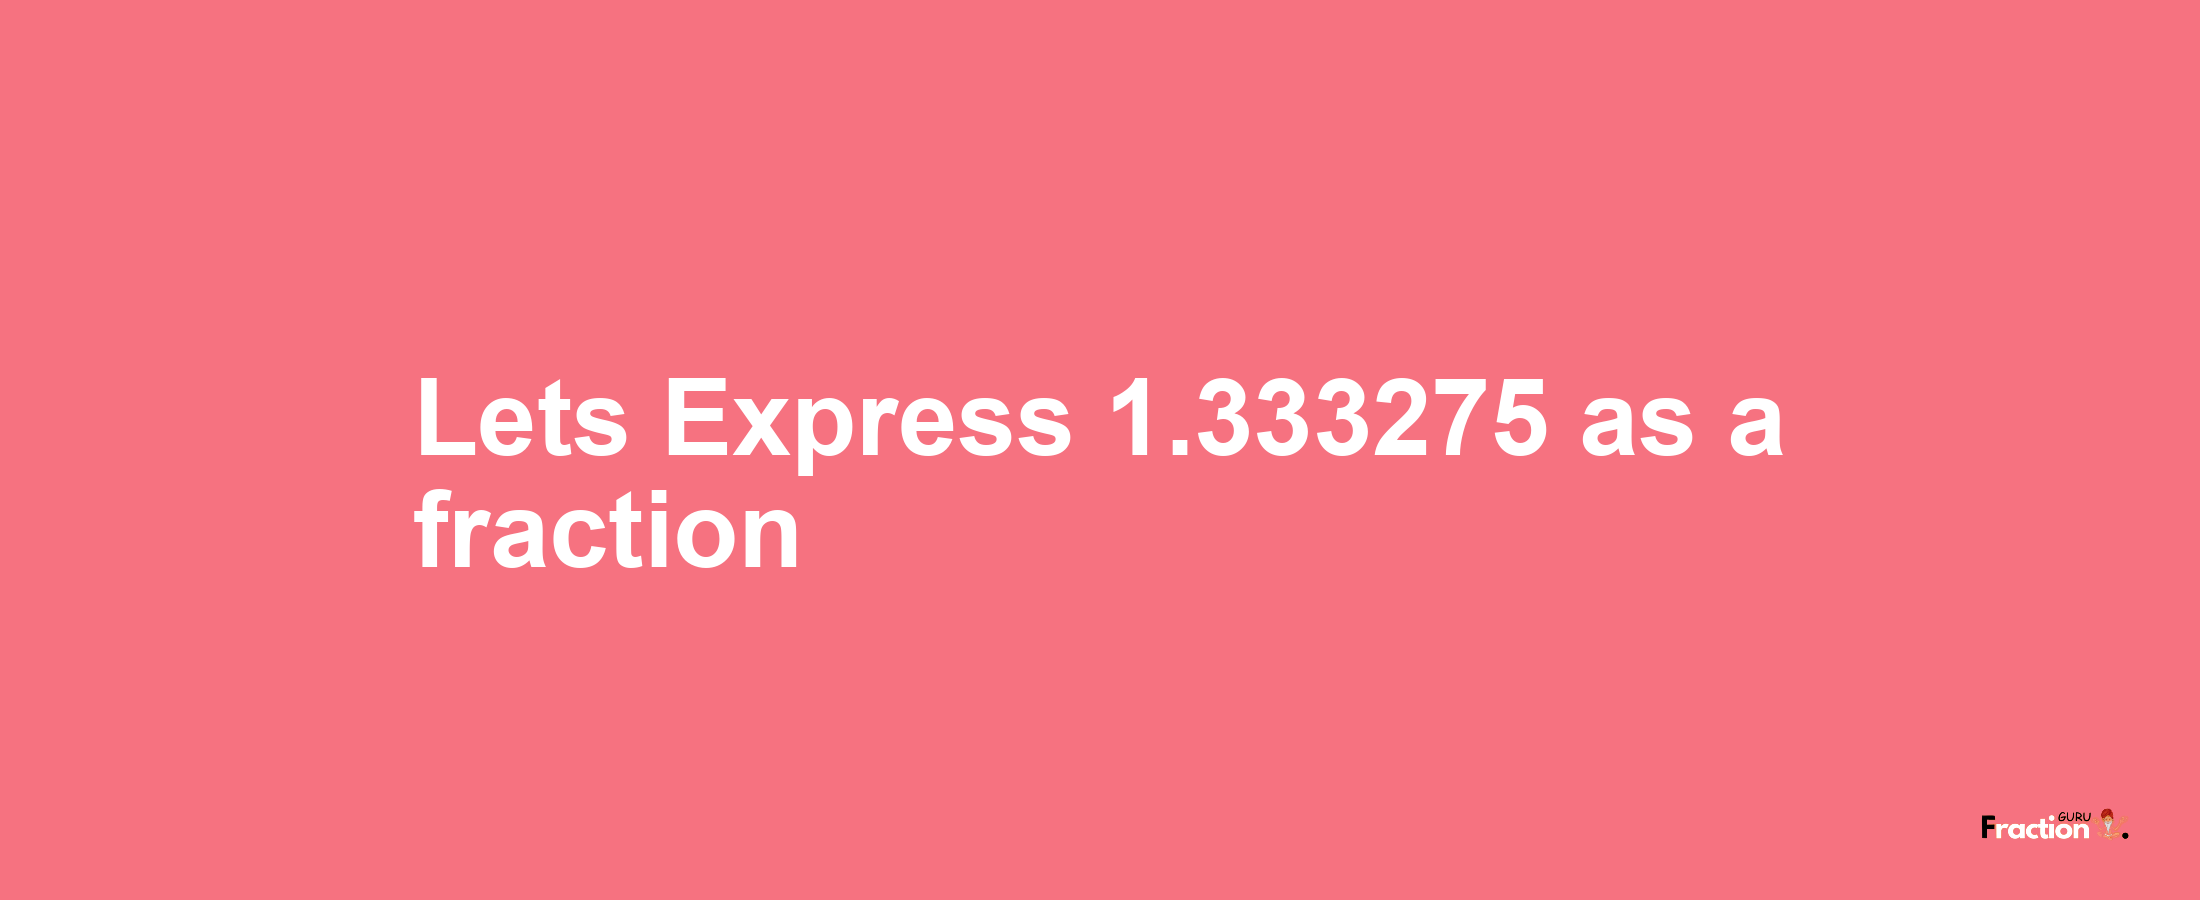 Lets Express 1.333275 as afraction